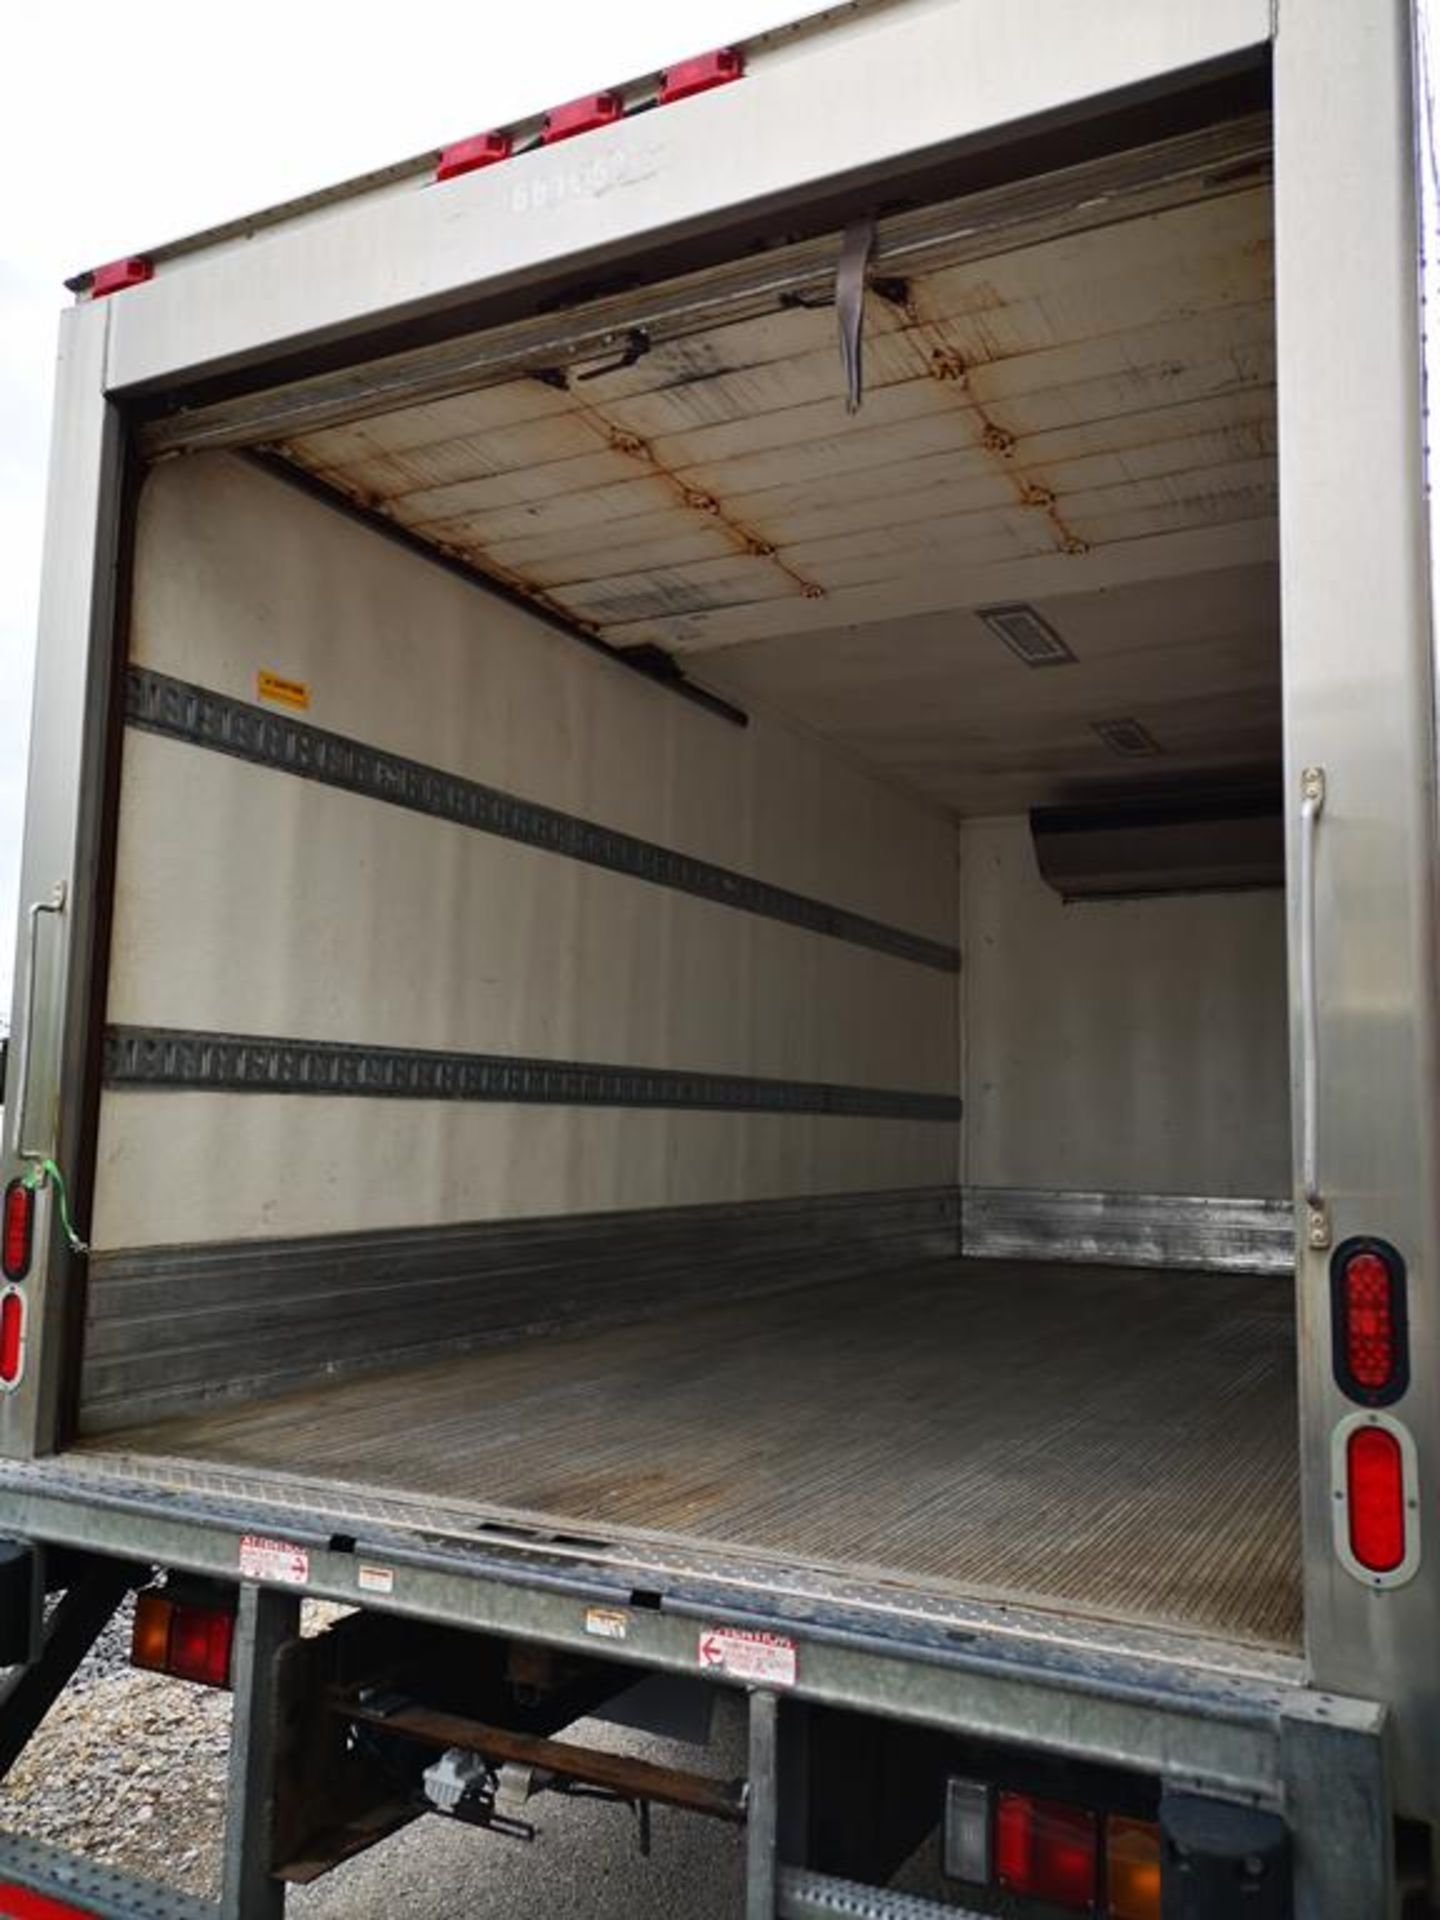 2013, HINO, 195, REEFER TRUCK, MULTIVANS, 18', INSULATED BOX, THERMOKING, T800 WHISPER, REEFER, - Image 9 of 22